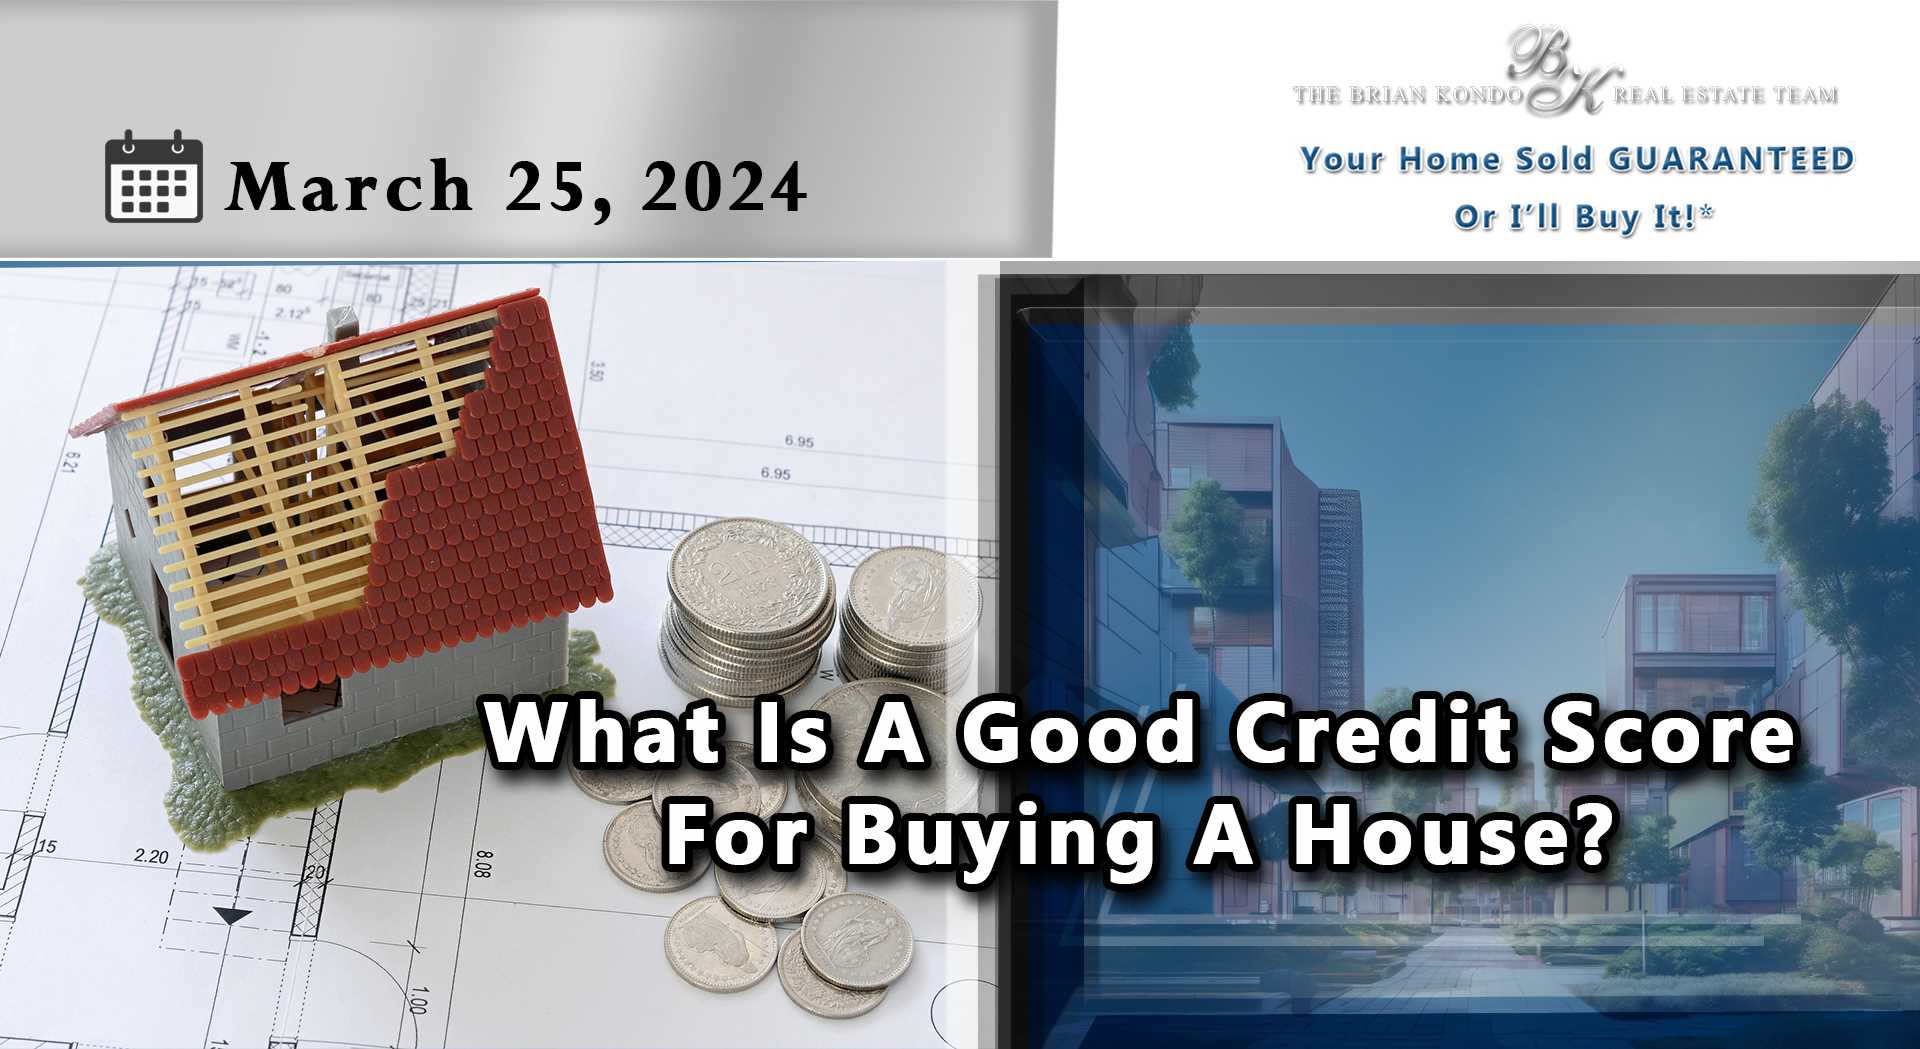 What Is A Good Credit Score For Buying A House?